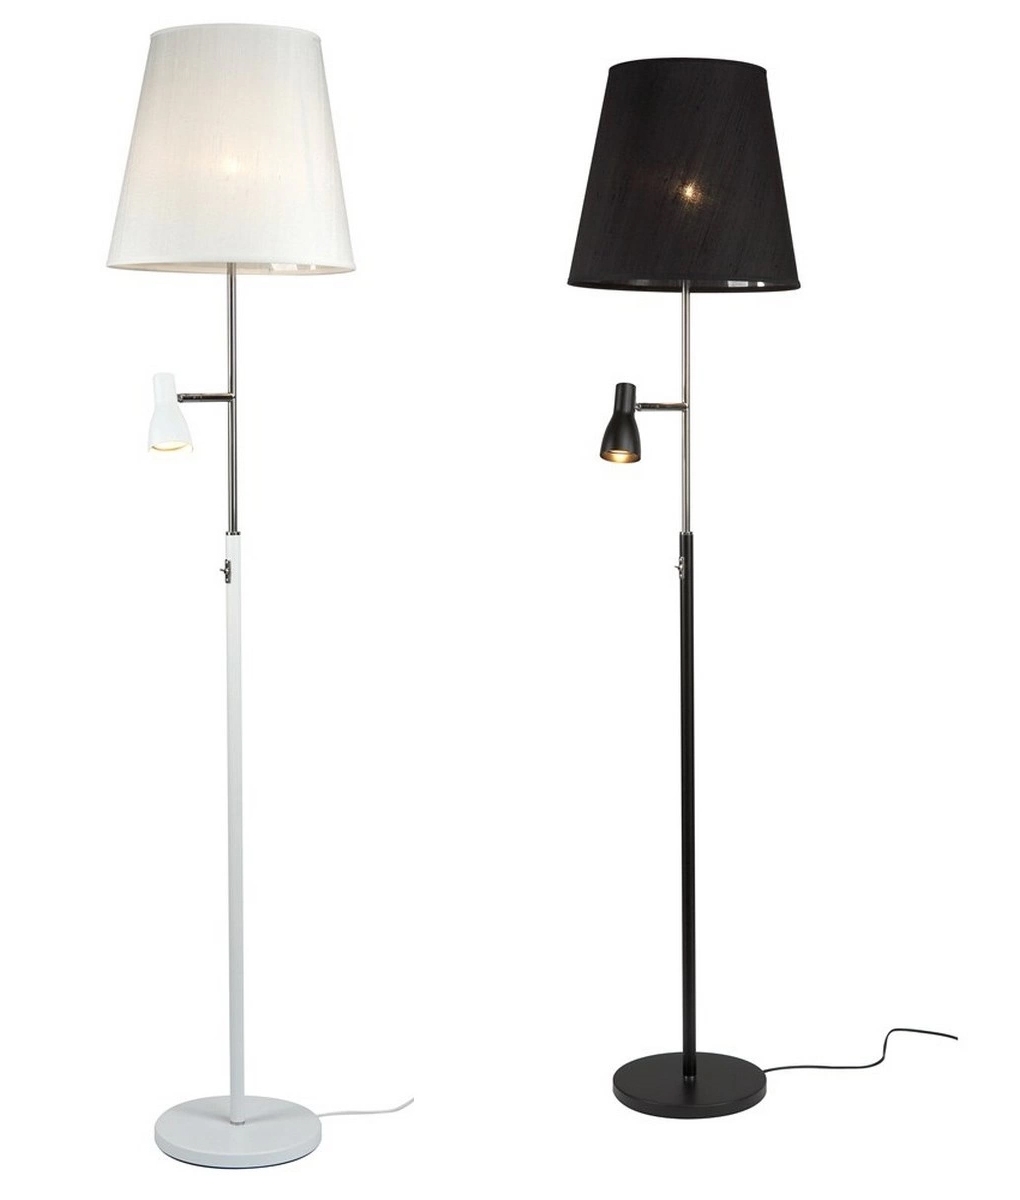 Shaded Floor Lamp And Dimmable Led, Dimmable Reading Floor Lamp